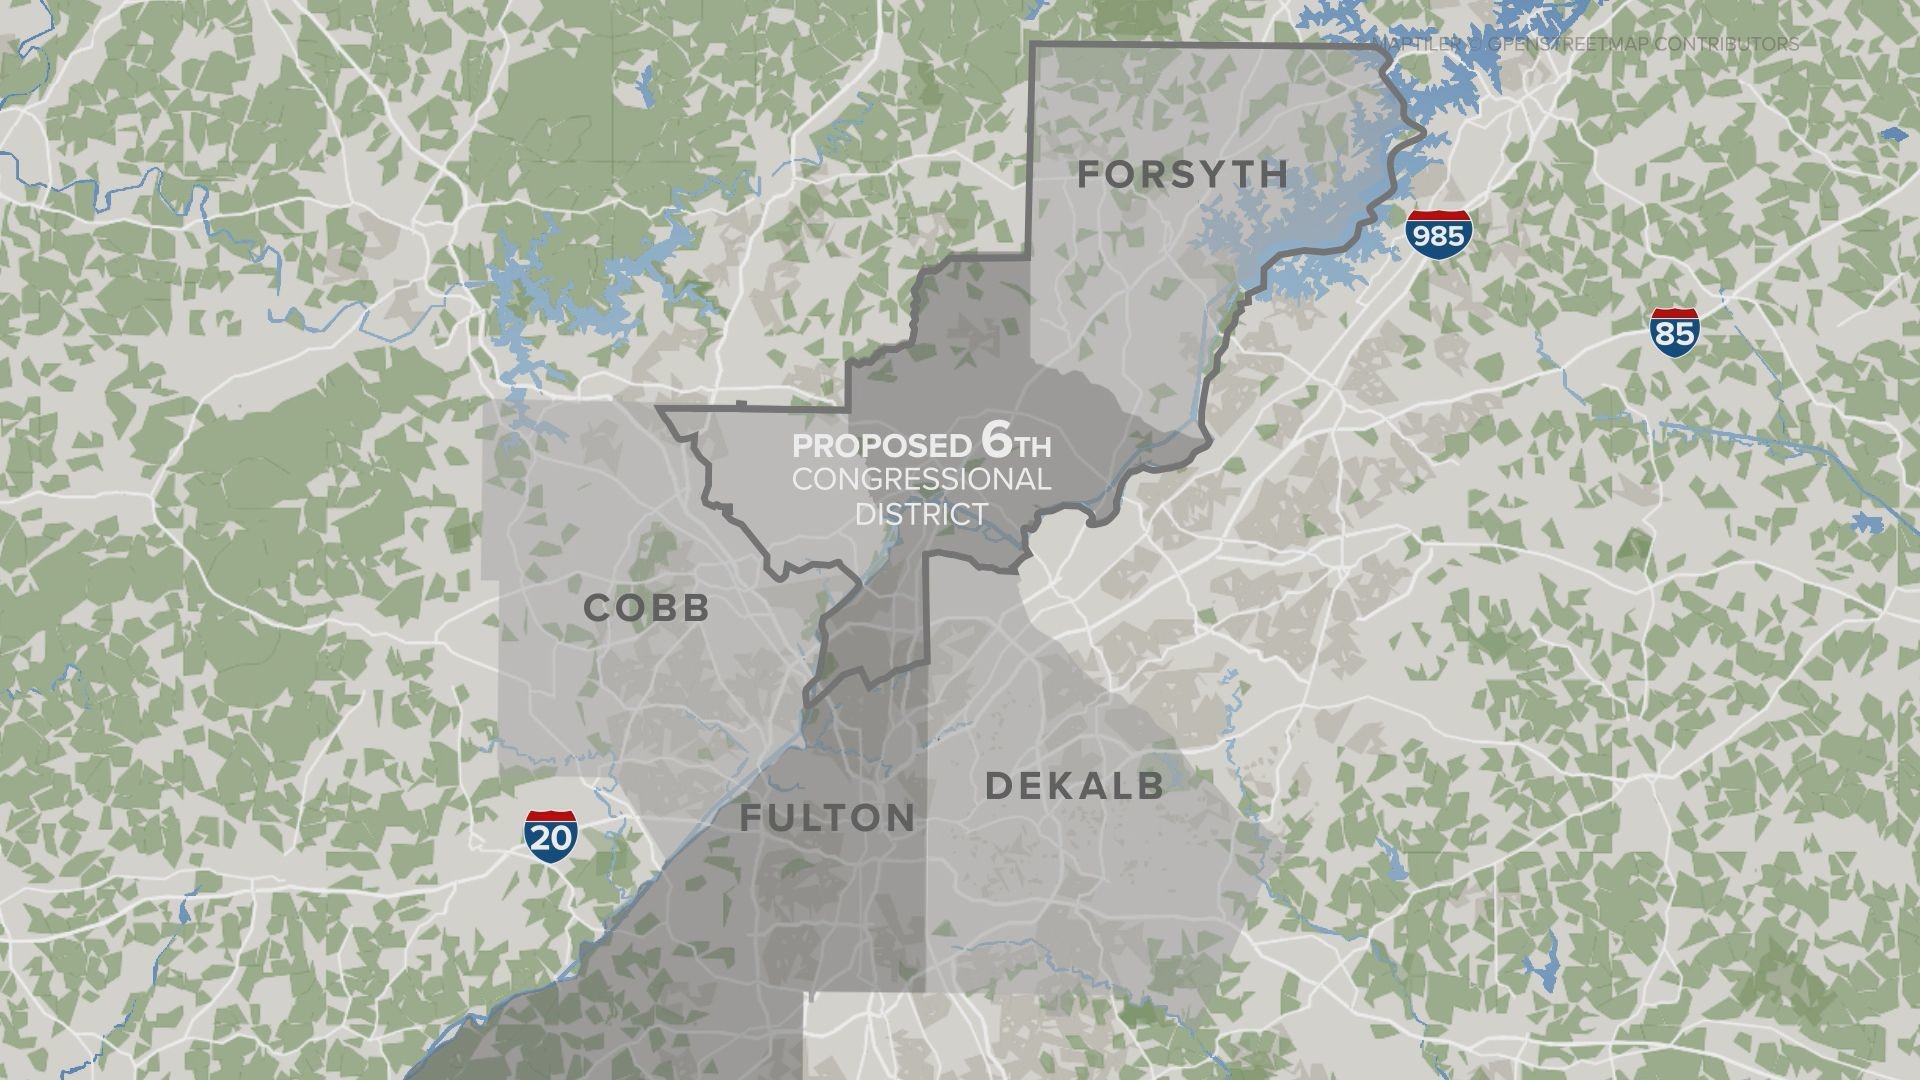 Newly drawn congressional districts could shake up the state leadership in Georgia all over again.